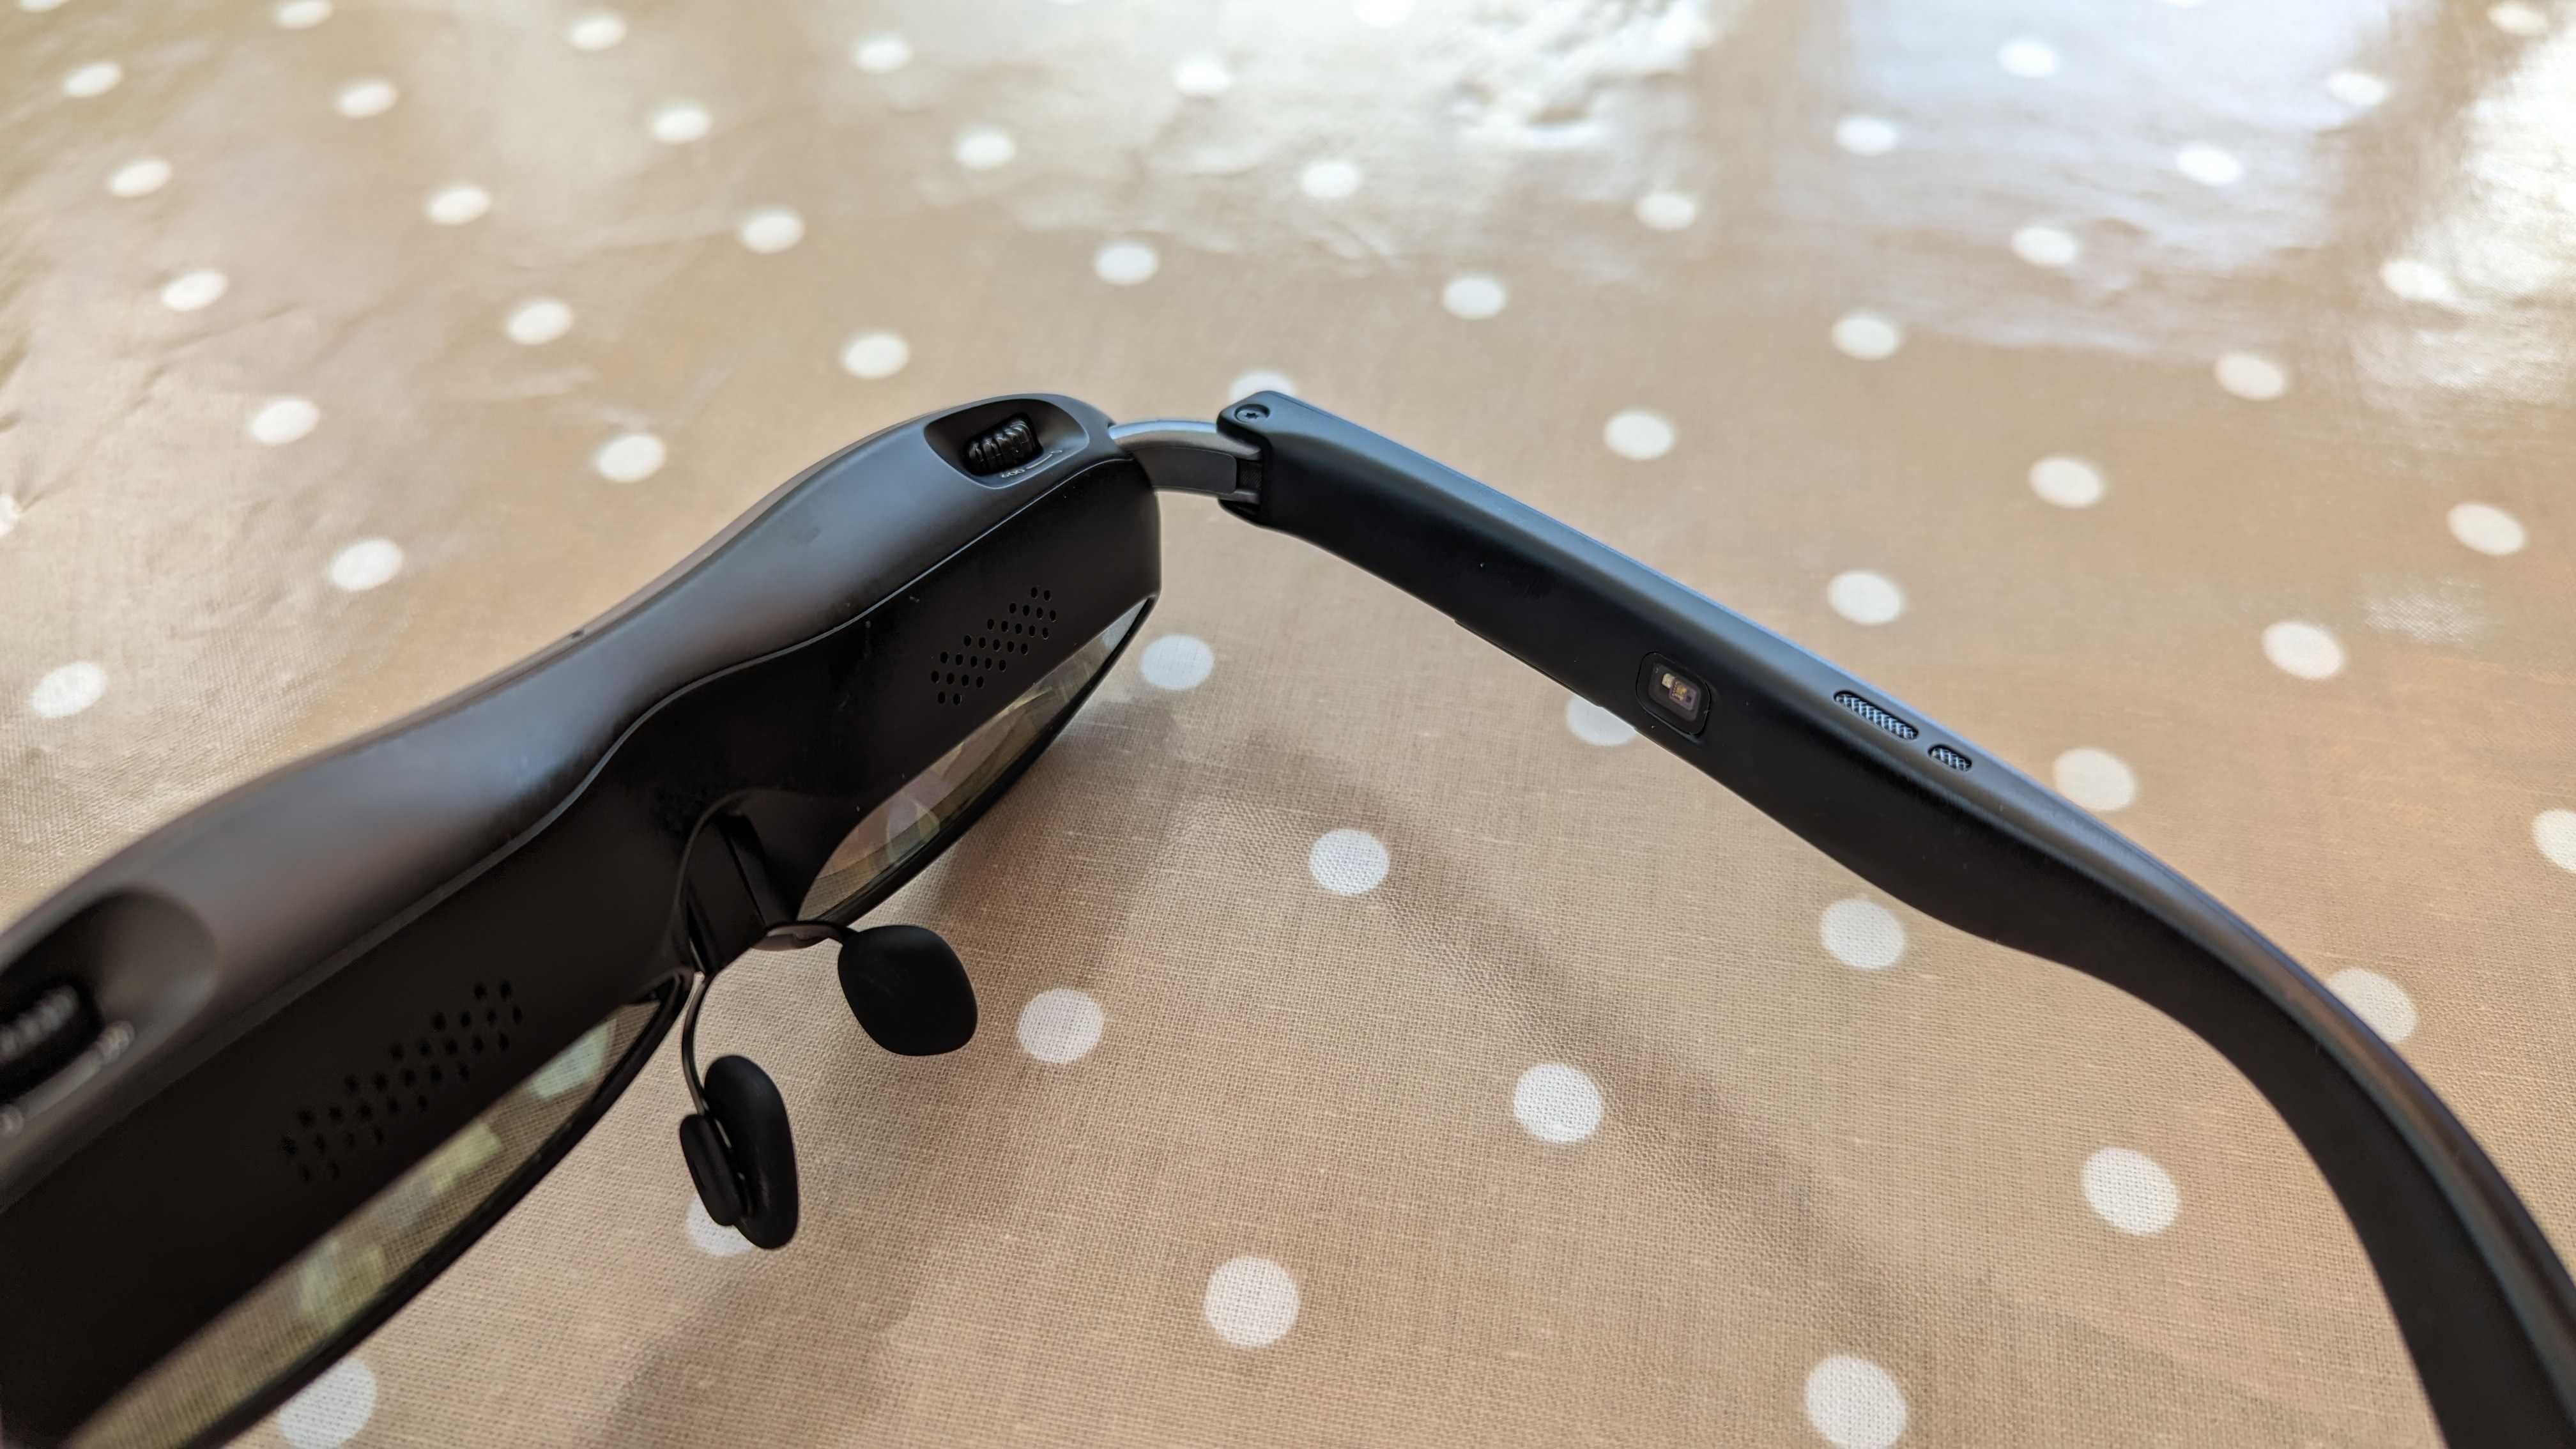 The Rokid Max AR glasses arm seen from the side. You can see the speakers on top, the nose clips and inner screens